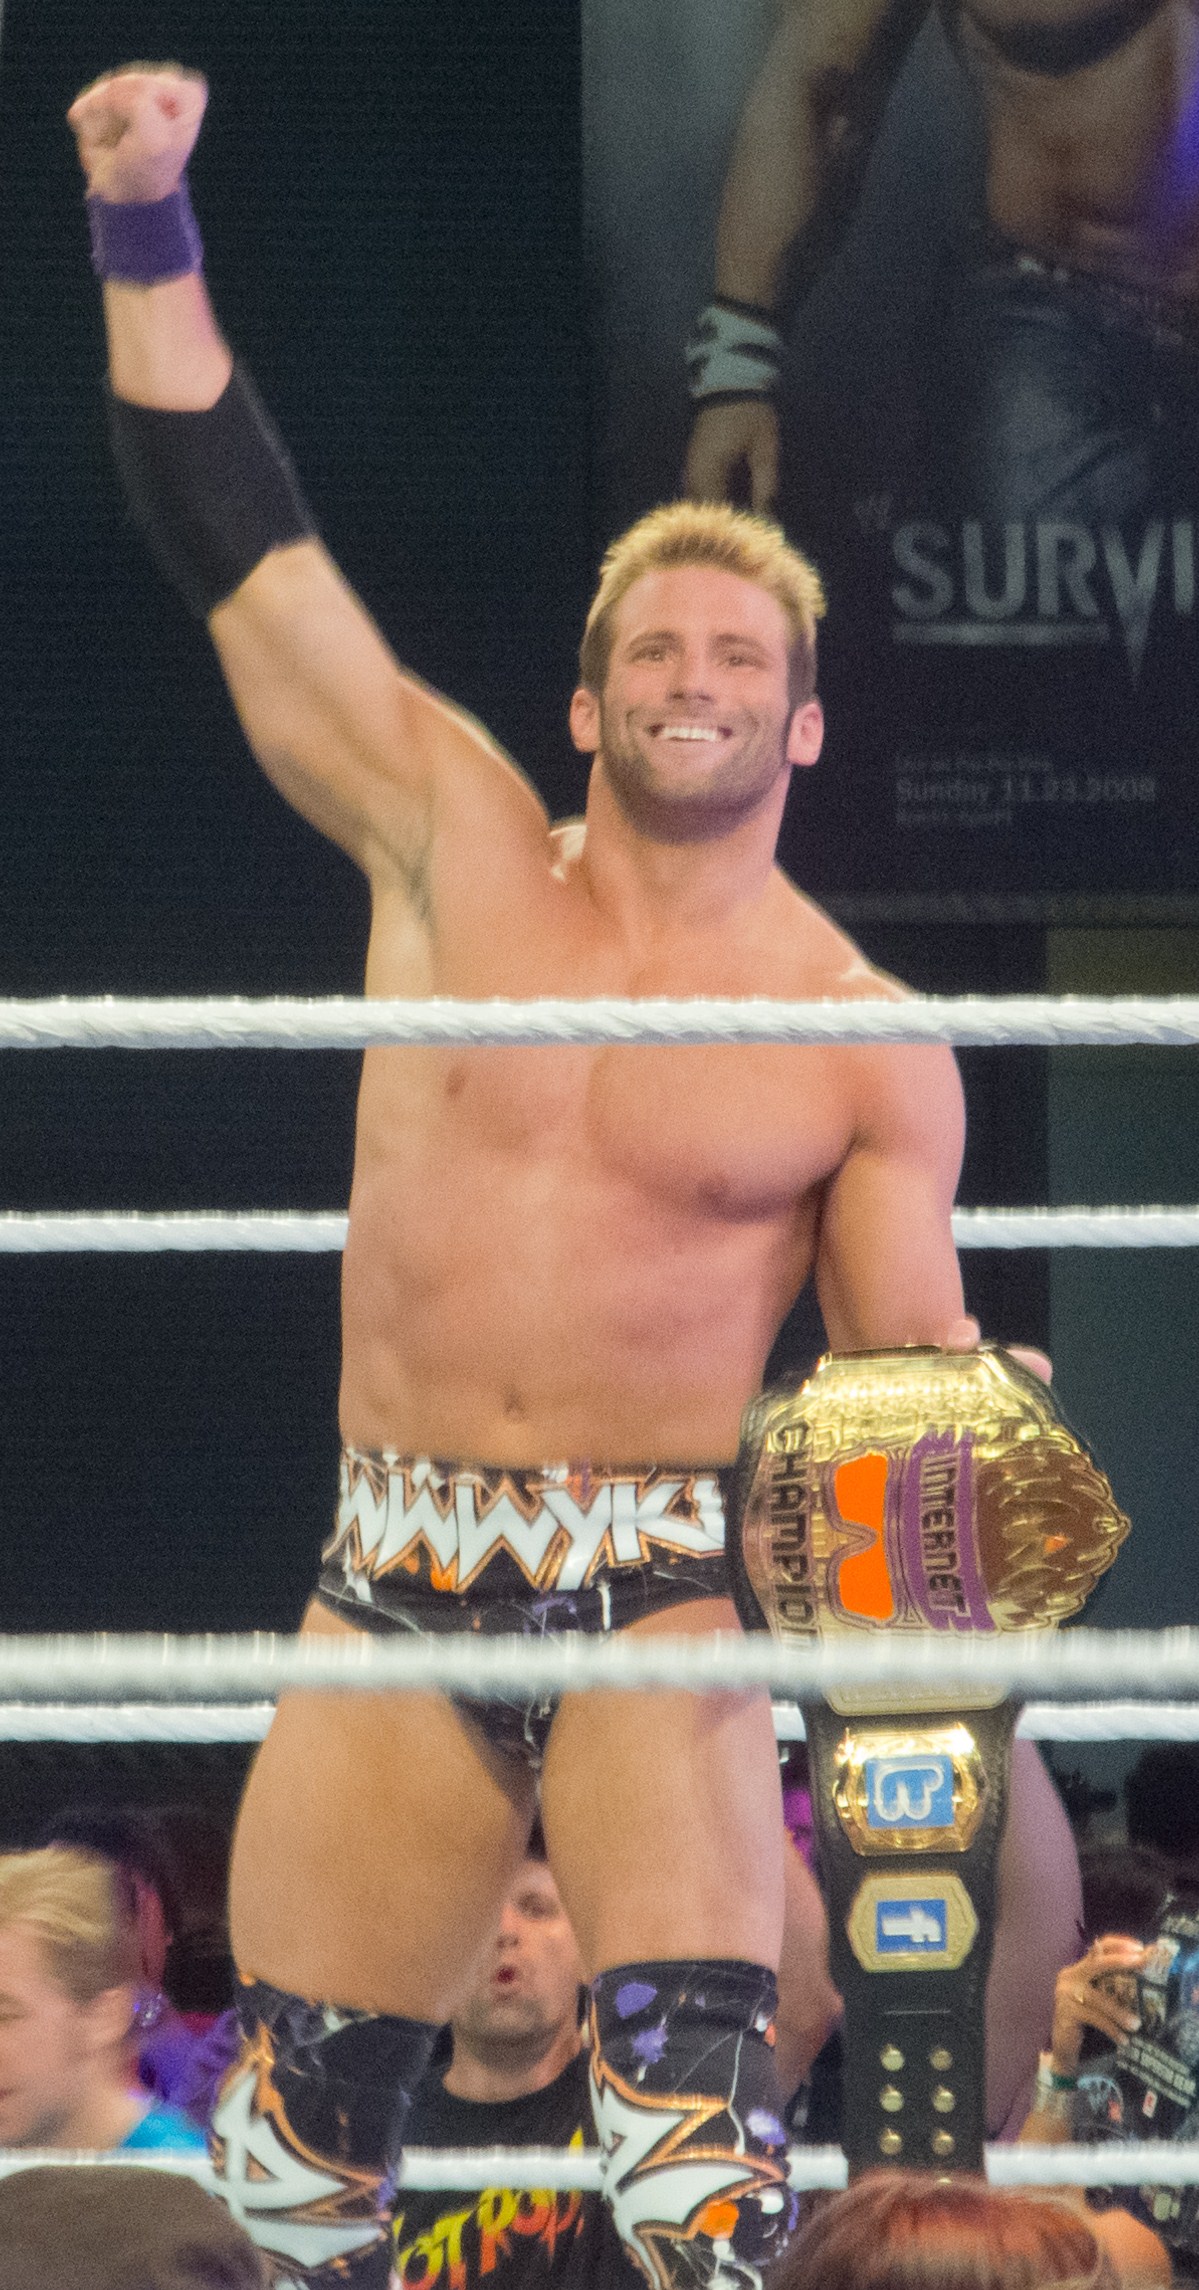 Zack Ryder: 135,050 downside receives an additional 1.5 bonus for high merchandise sales 3 year contract